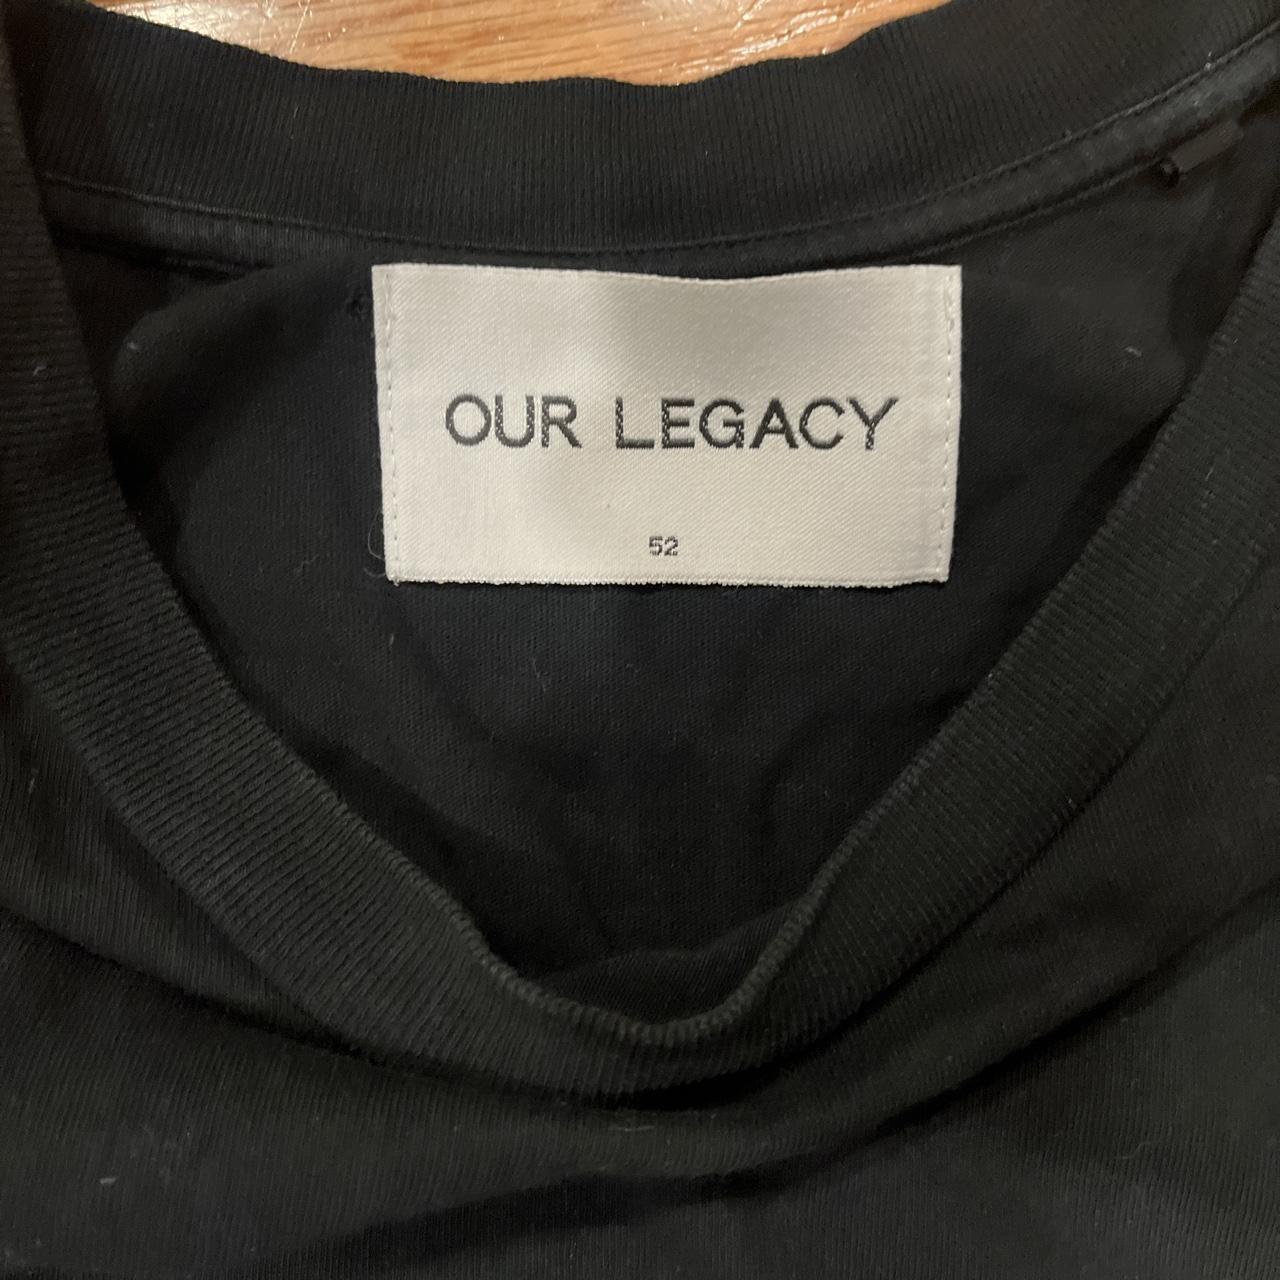 Our Legacy Men's Black and White T-shirt (3)